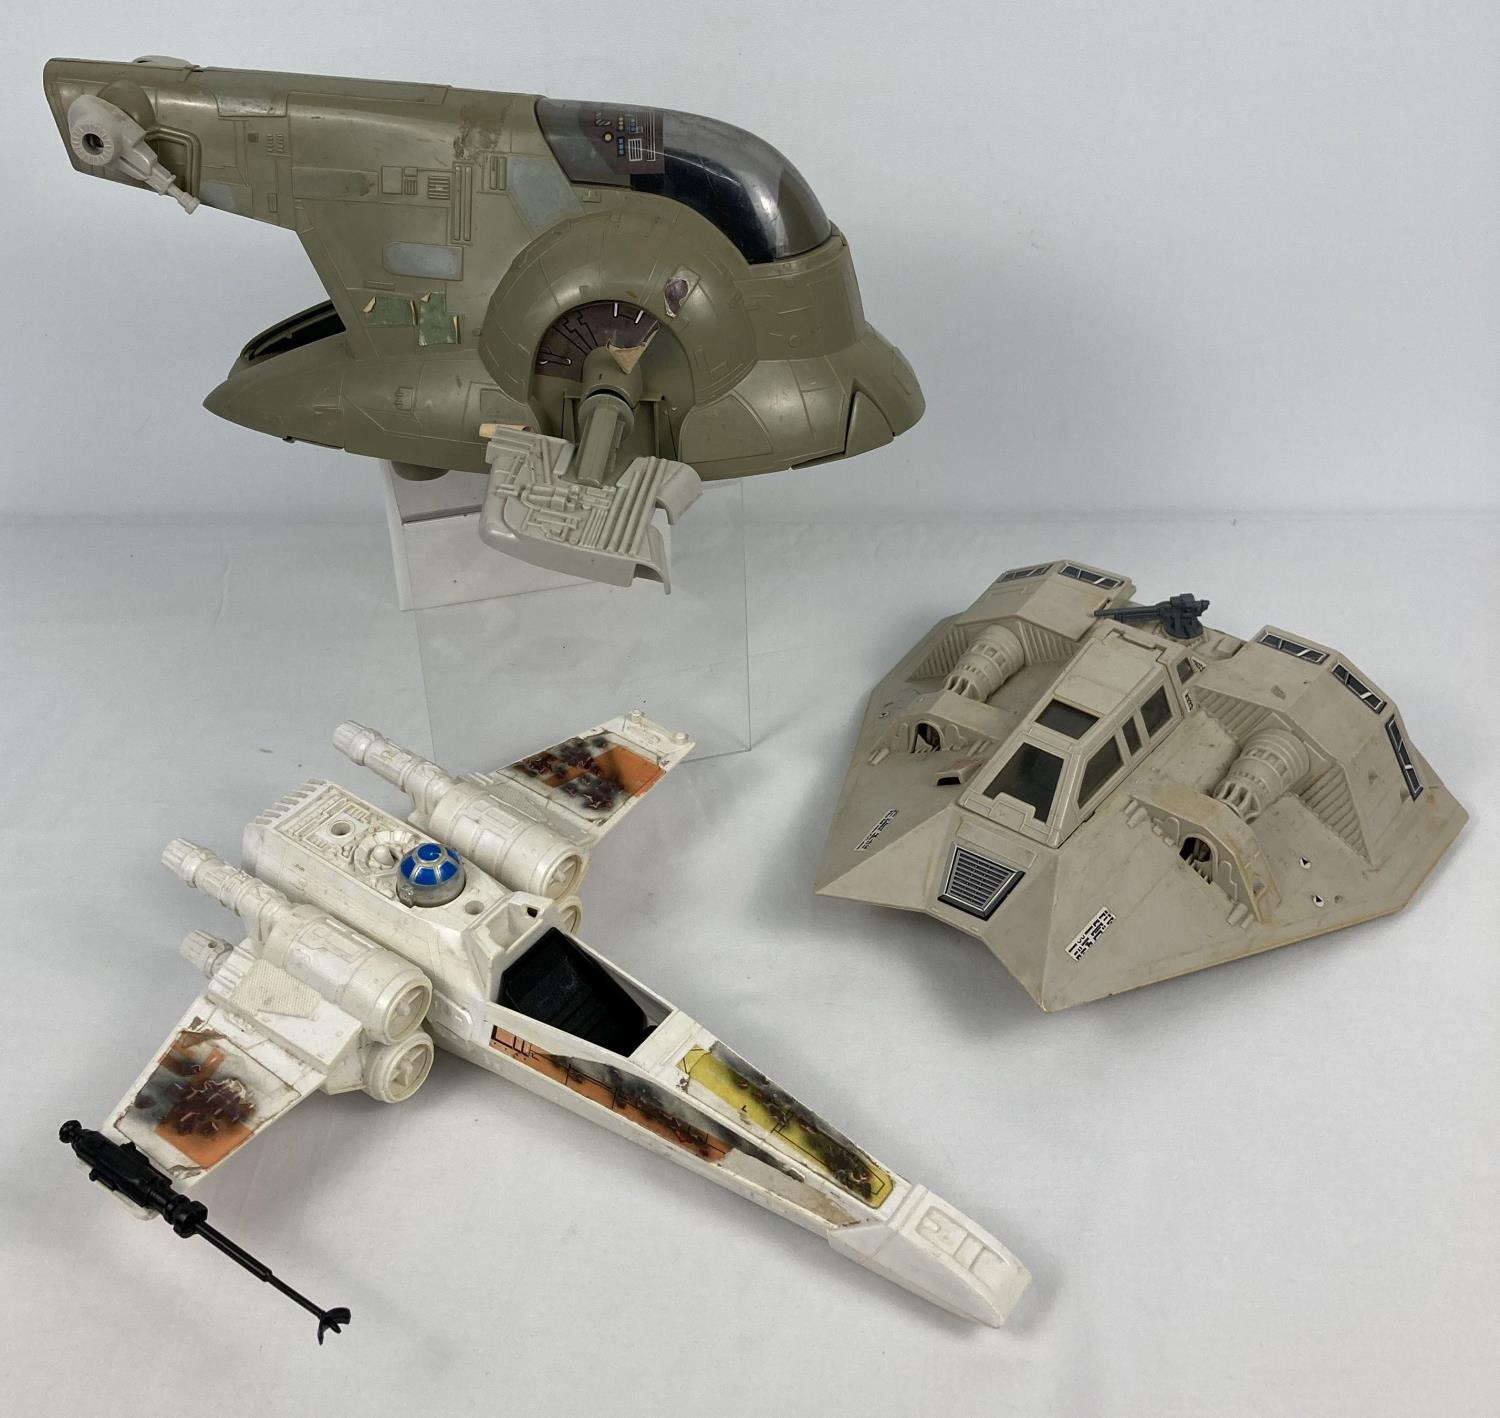 3 vintage Star Wars Vehicles by Kenner. 1980 Snowspeeder, 1983 X-Wing with damaged decals and 1981